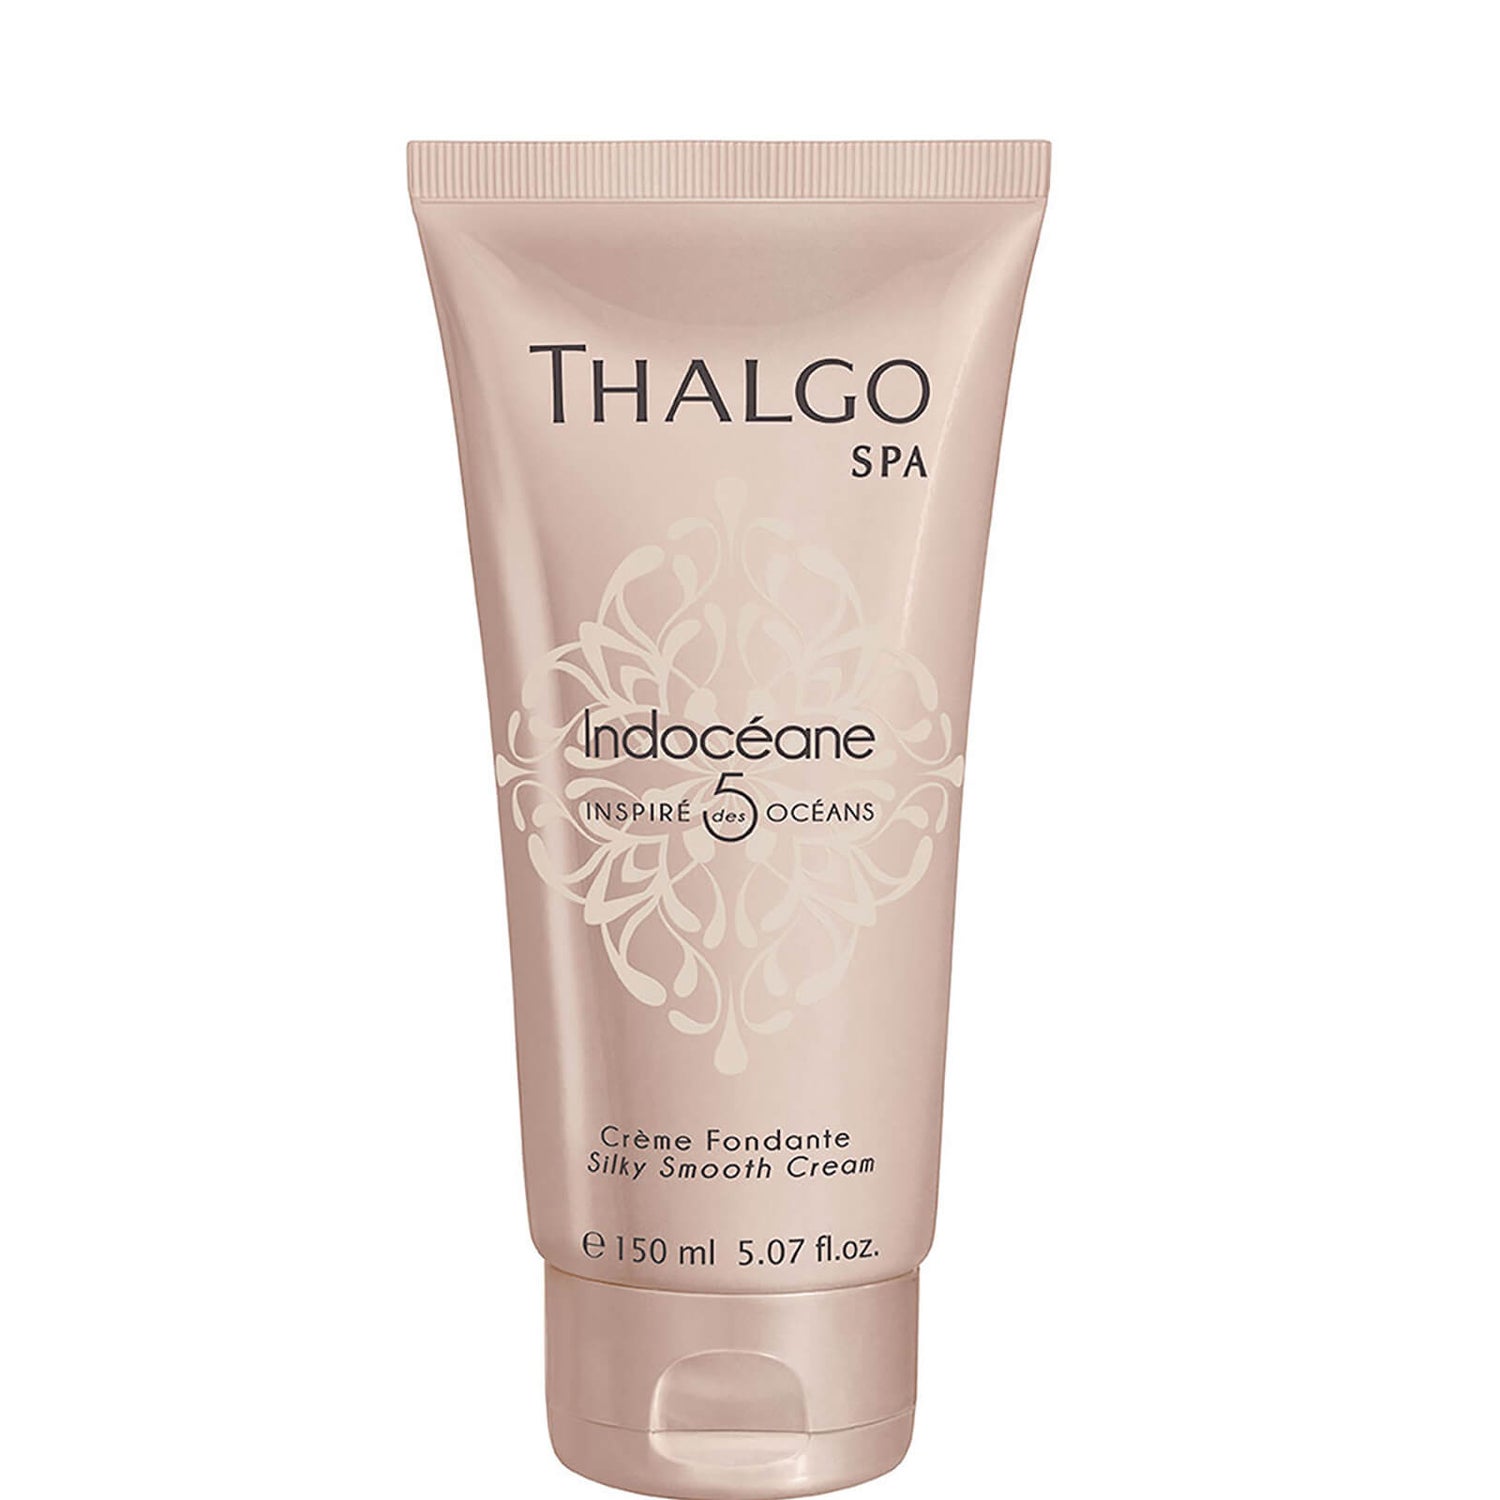 Thalgo Spa Line Indoceane Silky Smooth Cream 150ml